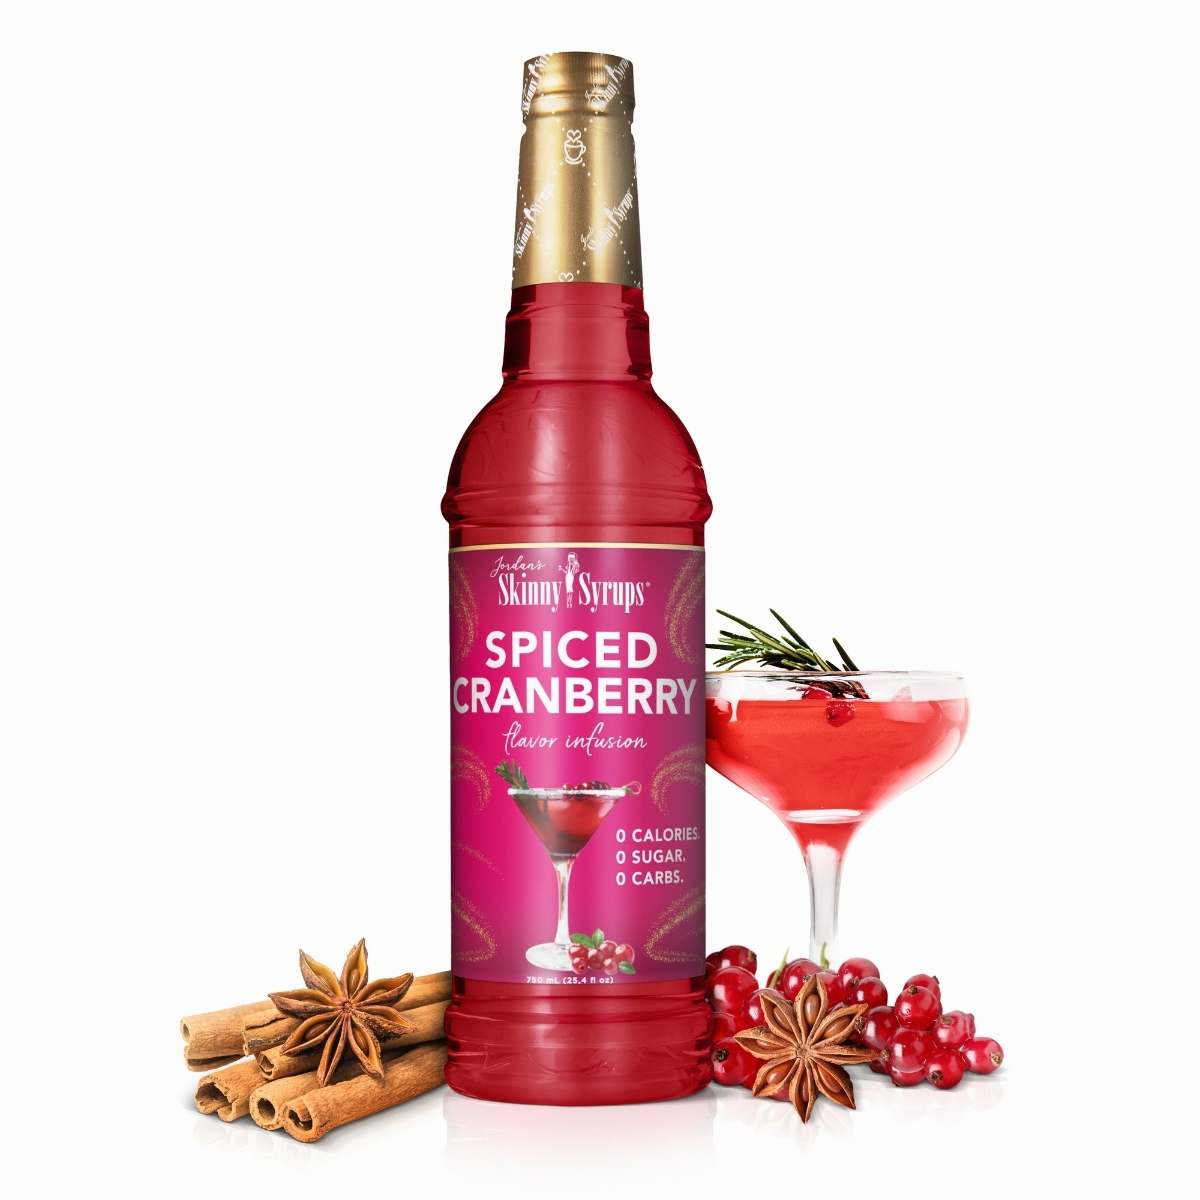 Sugar Free Spiced Cranberry Flavor Infusion Syrup - Skinny Mixes